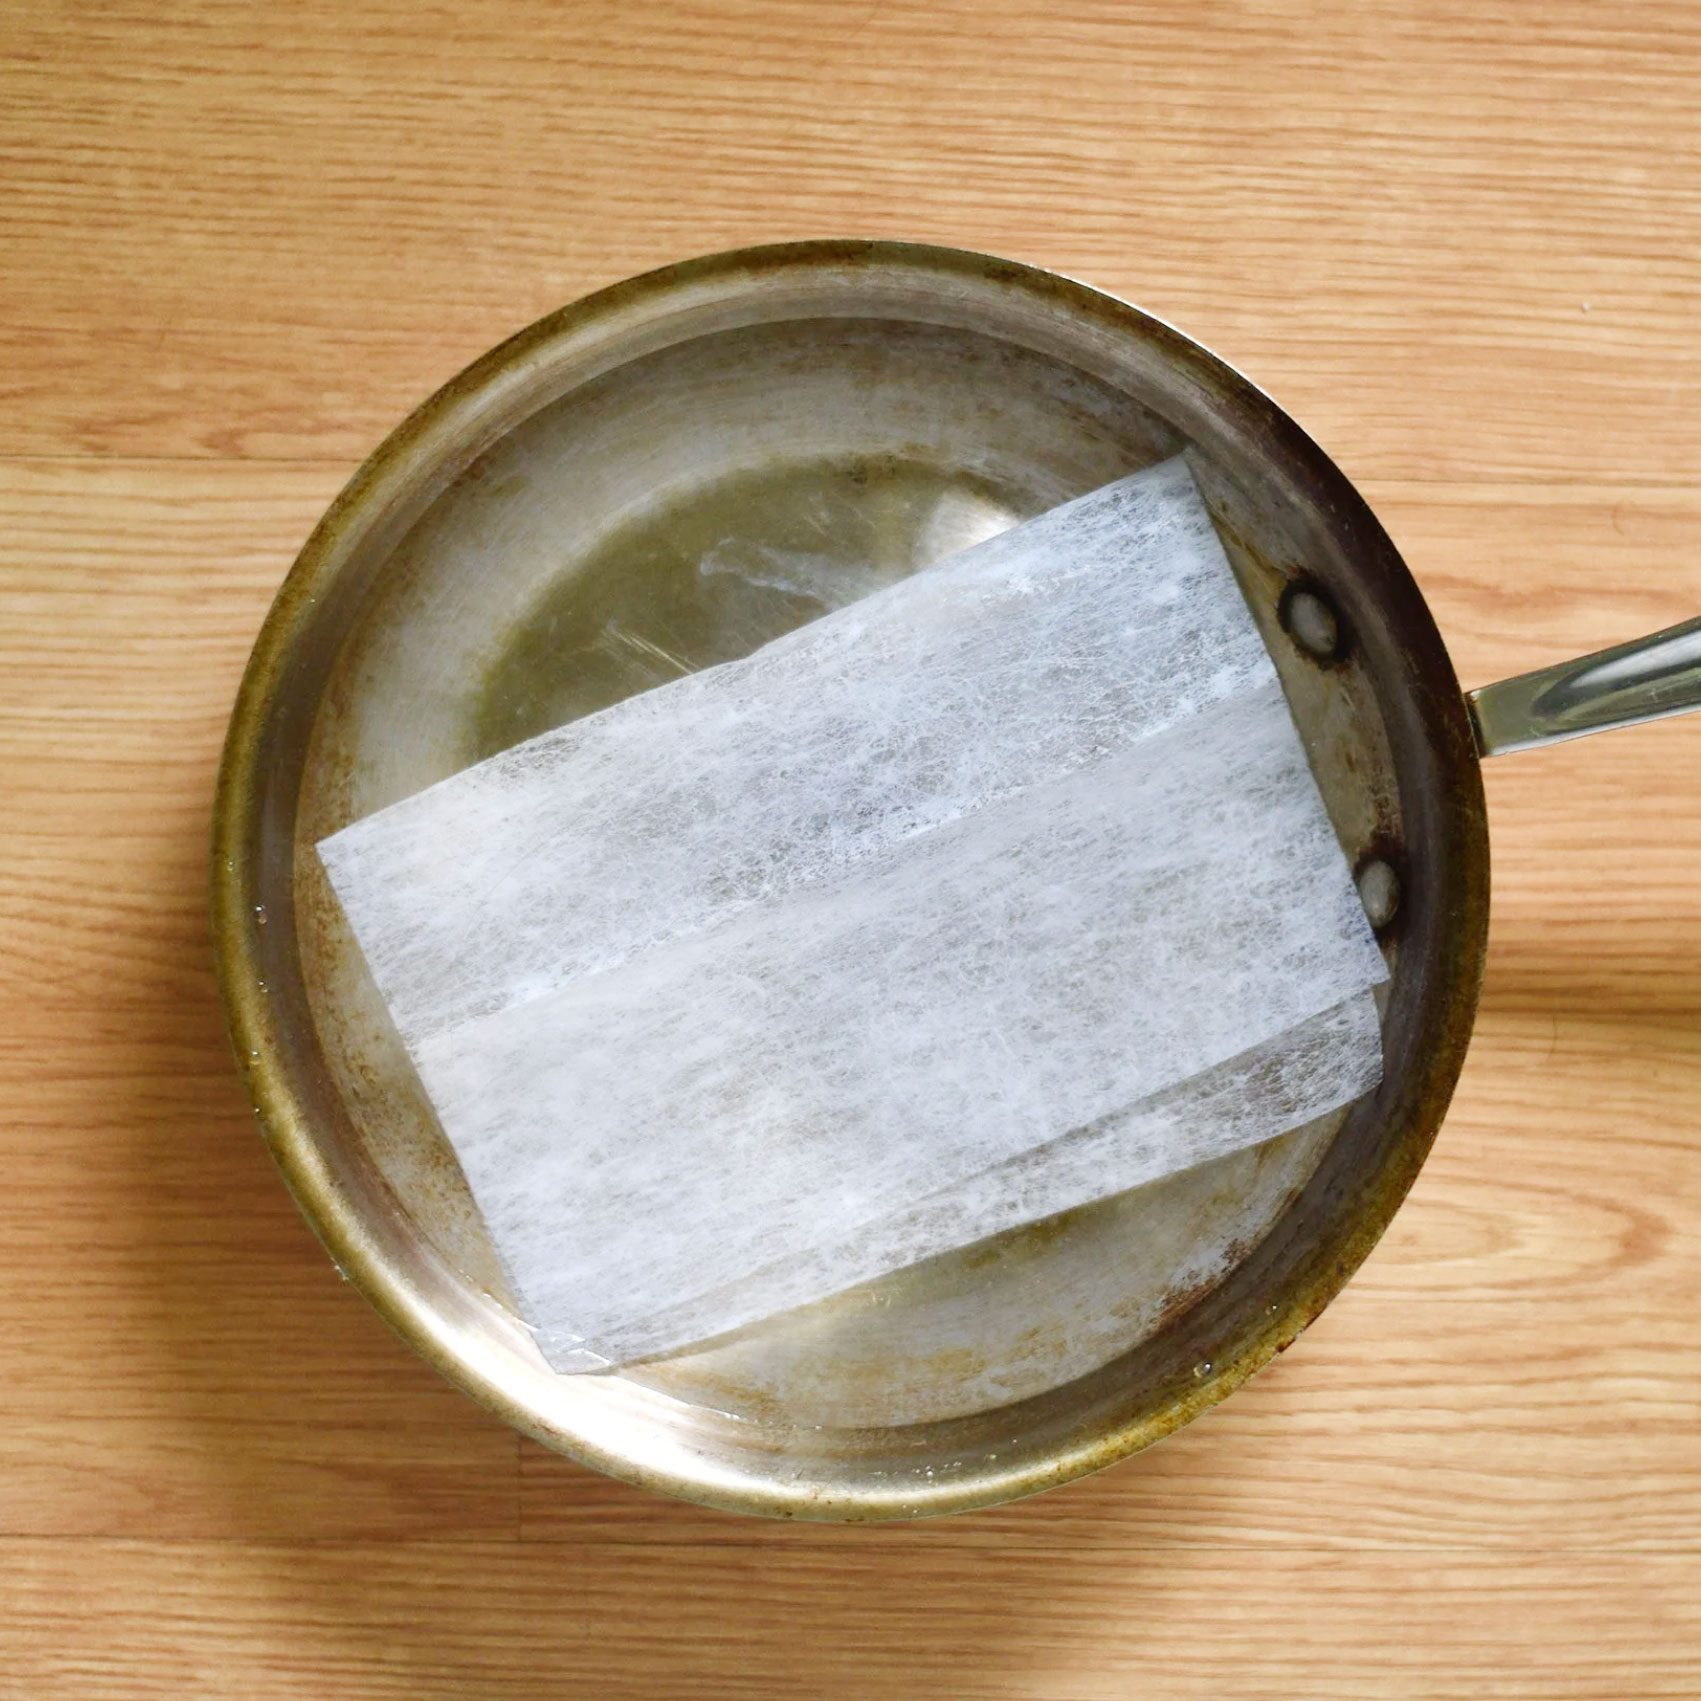 22 Uses for Dryer Sheets (That Aren't Laundry)